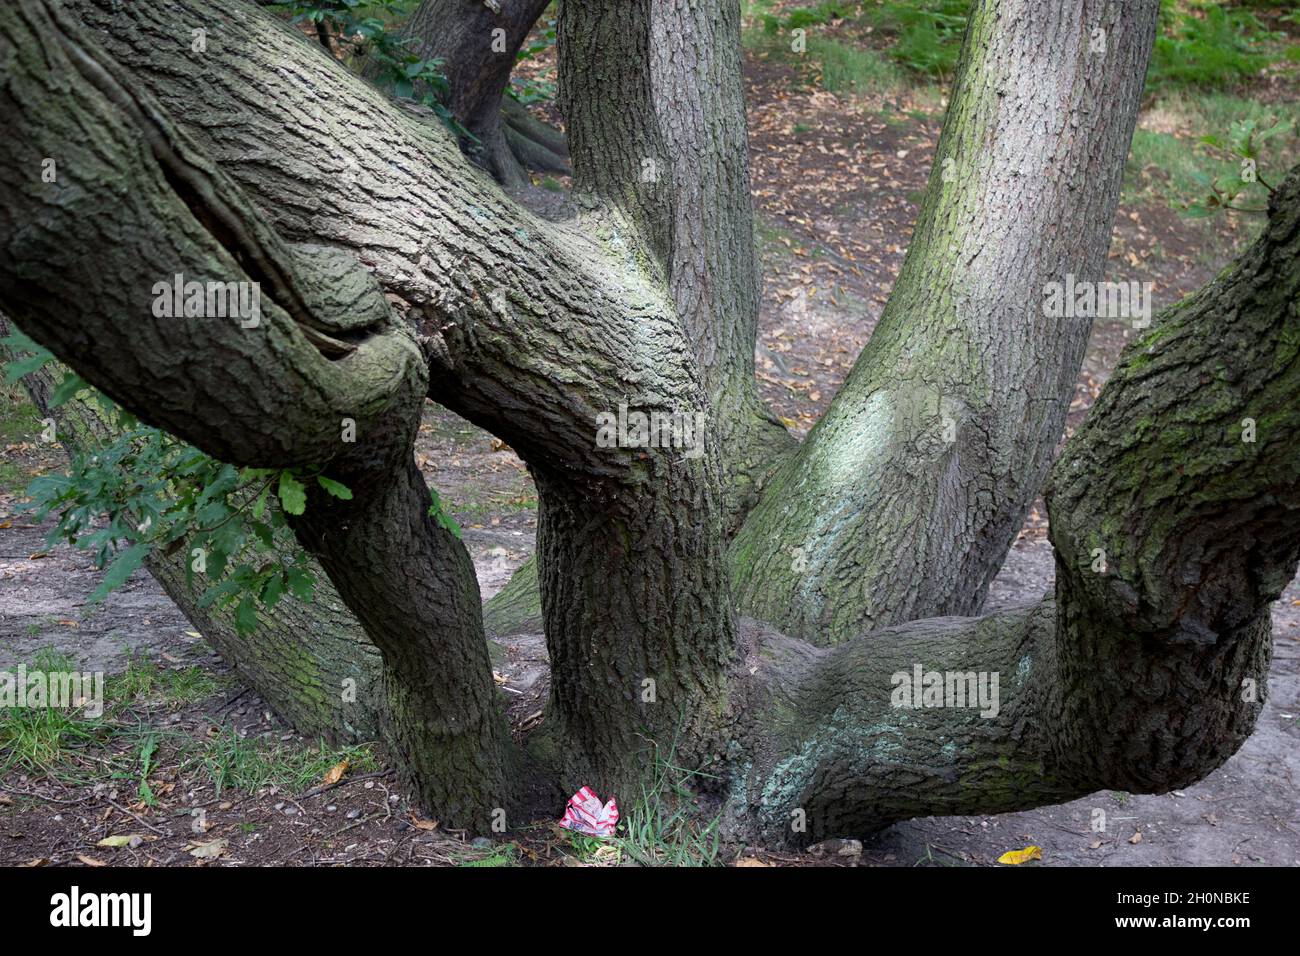 Tree Bark, Tree Trunk, Nature, Woods, Gravitropism, Tree Growing in Different Directions Stock Photo